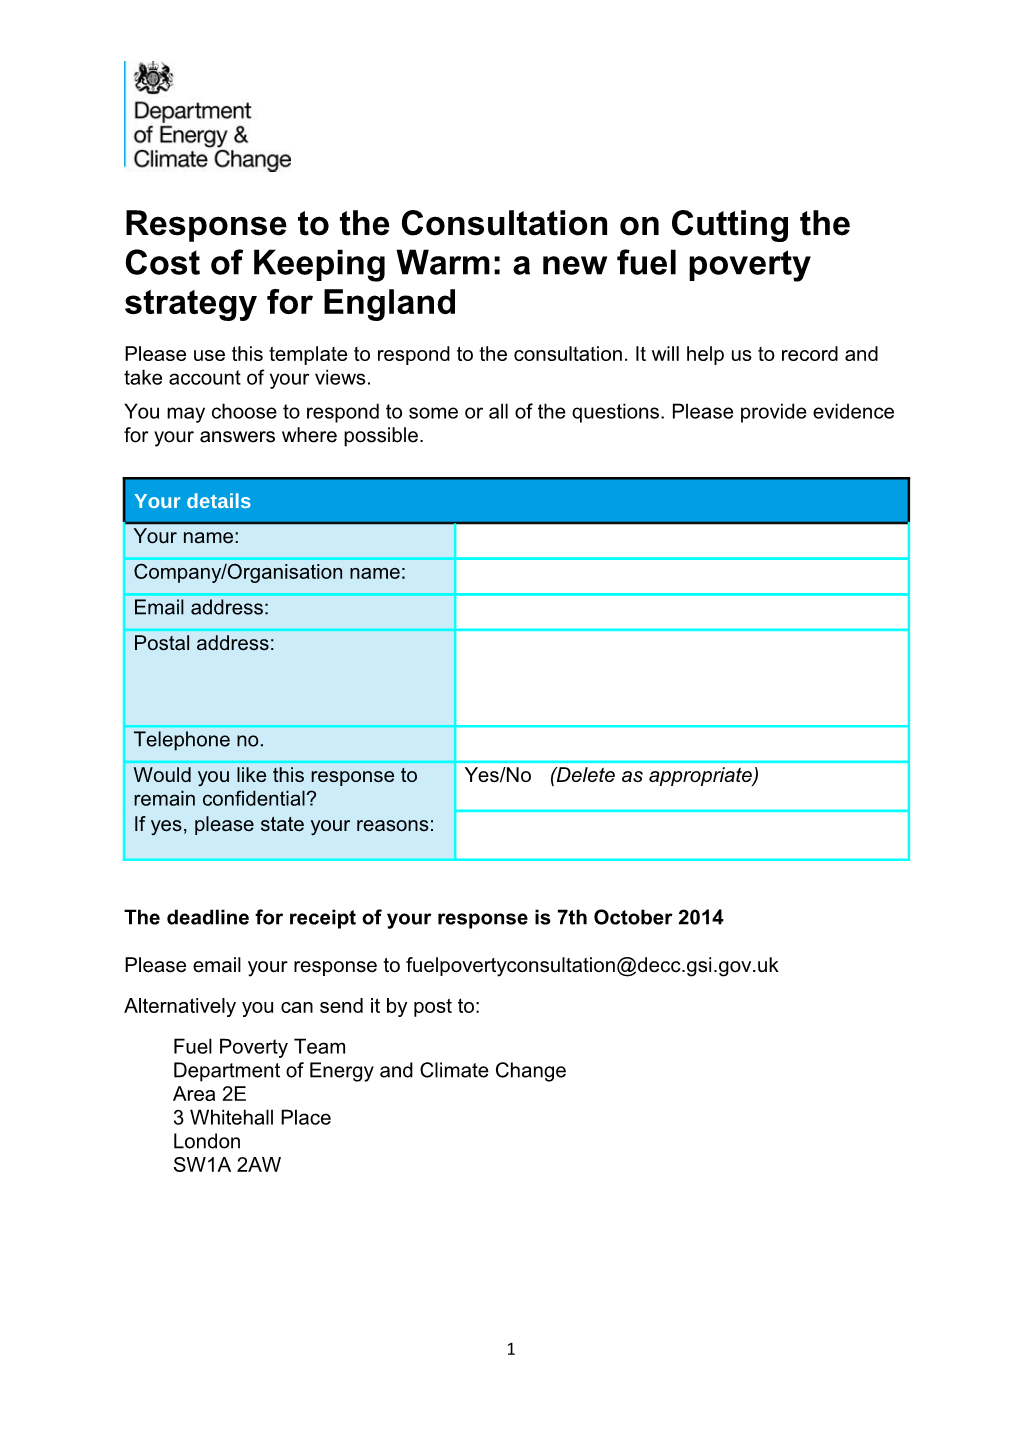 Response to the Consultation on Cutting the Cost of Keeping Warm: a New Fuel Poverty Strategy